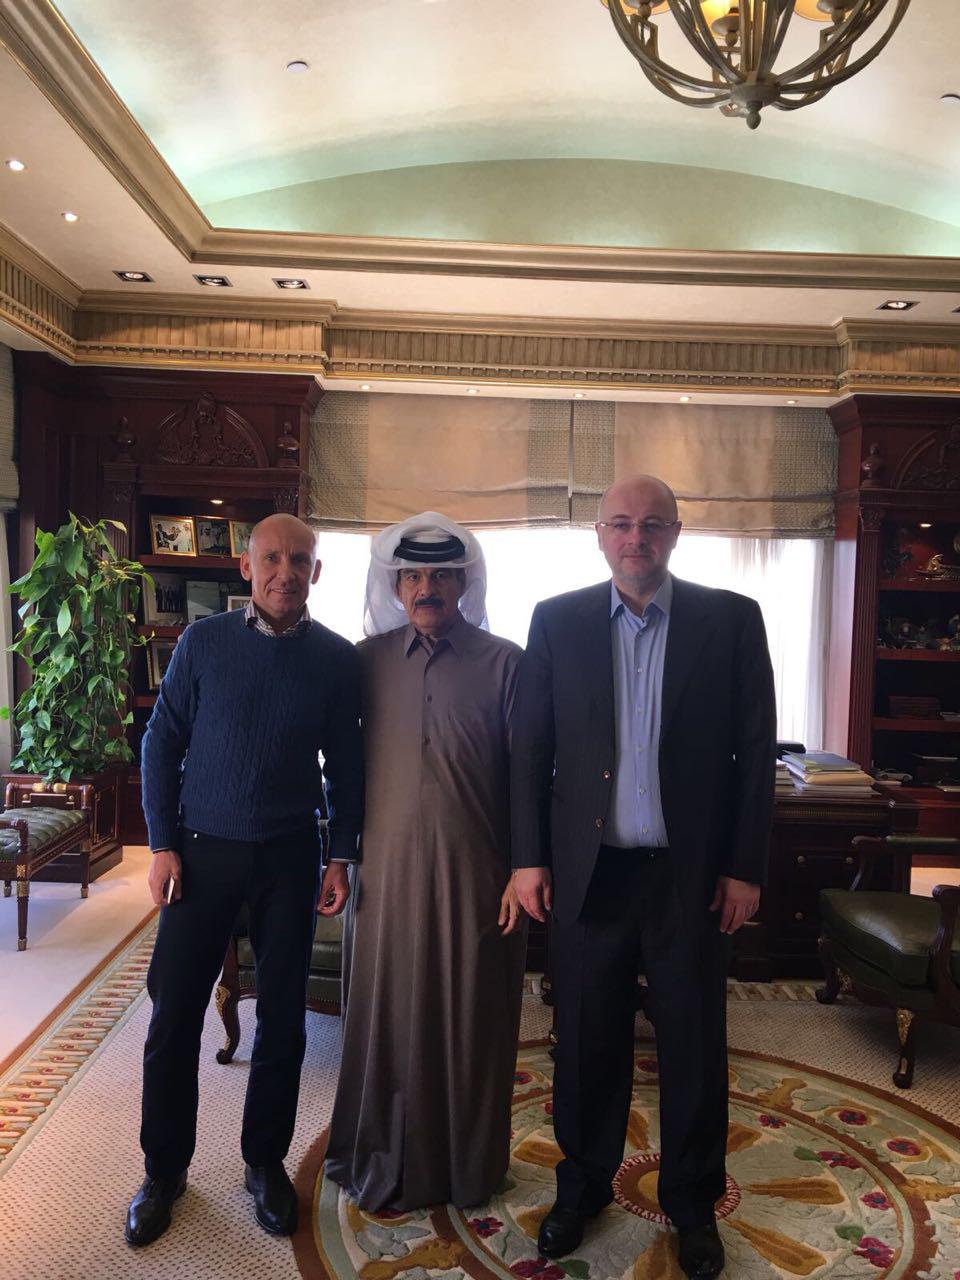 Sergey Kachushkin, Deputy Governor of the Nenets Autonomous District on cooperation with Federal Bodies of State Power in Moscow, Sheikh Mohammed ben Fahd Al Thani, the State Minister of Qatar, Ruslan Tokaev, founder of the Company